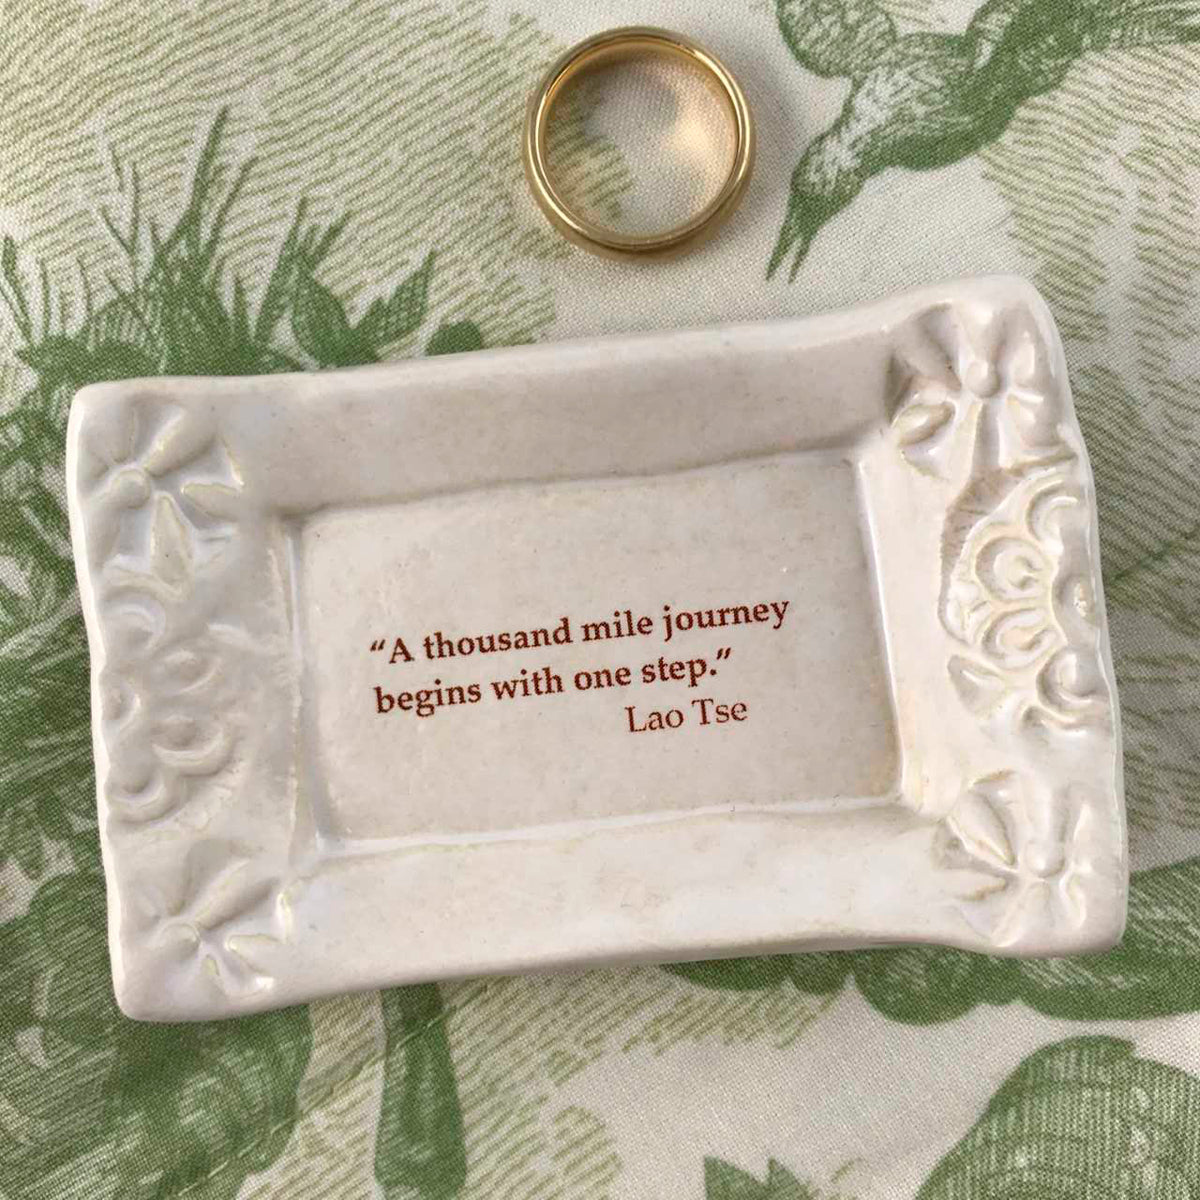 Handmade dish with quote by Lao Tse.